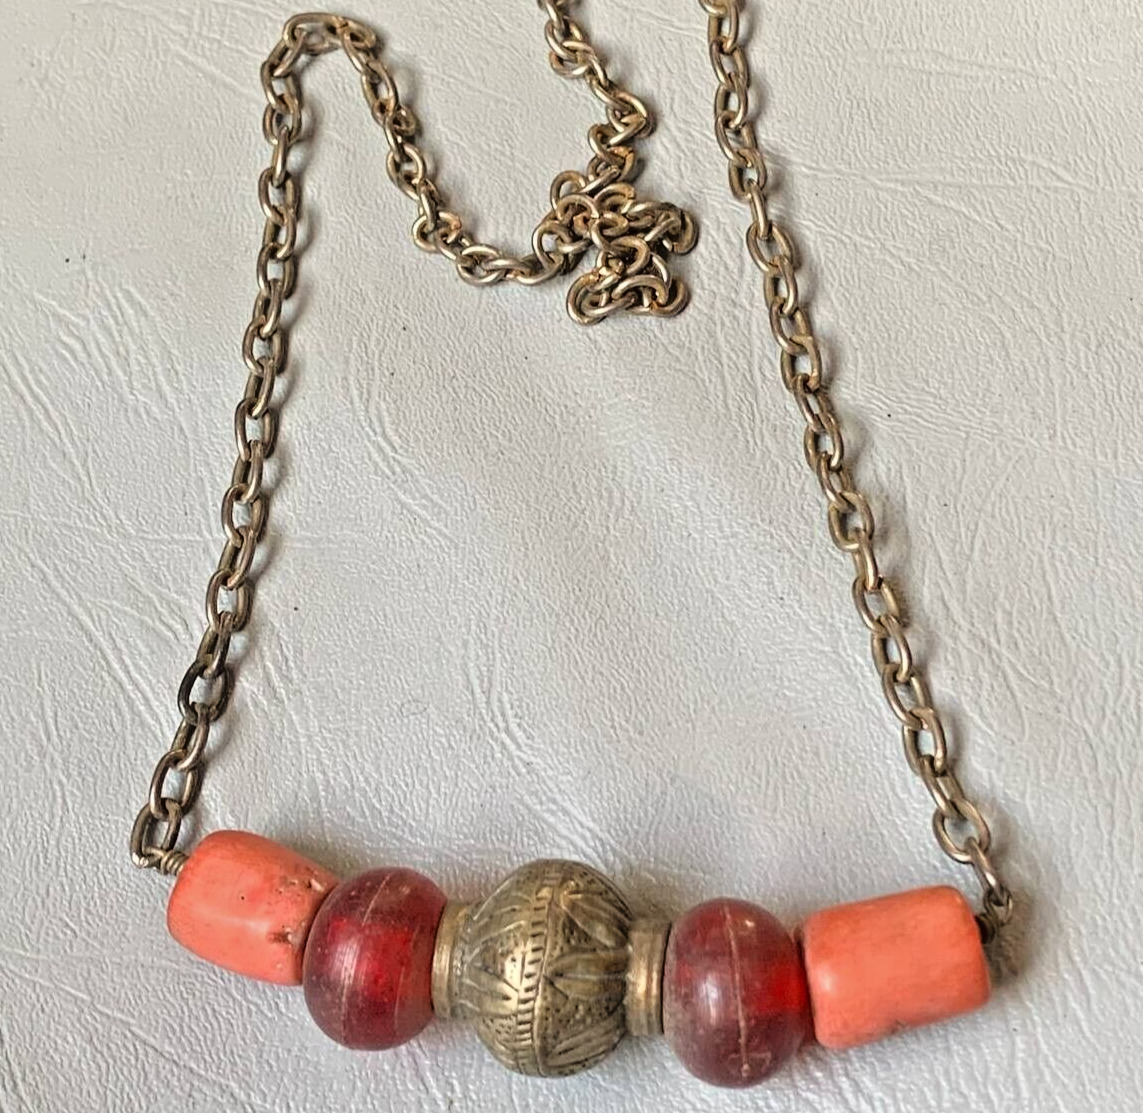 VINTAGE REALLY RARE ANCIENT BRONZE VIKING AMULET PENDANT NECKLACE WITH BEADS